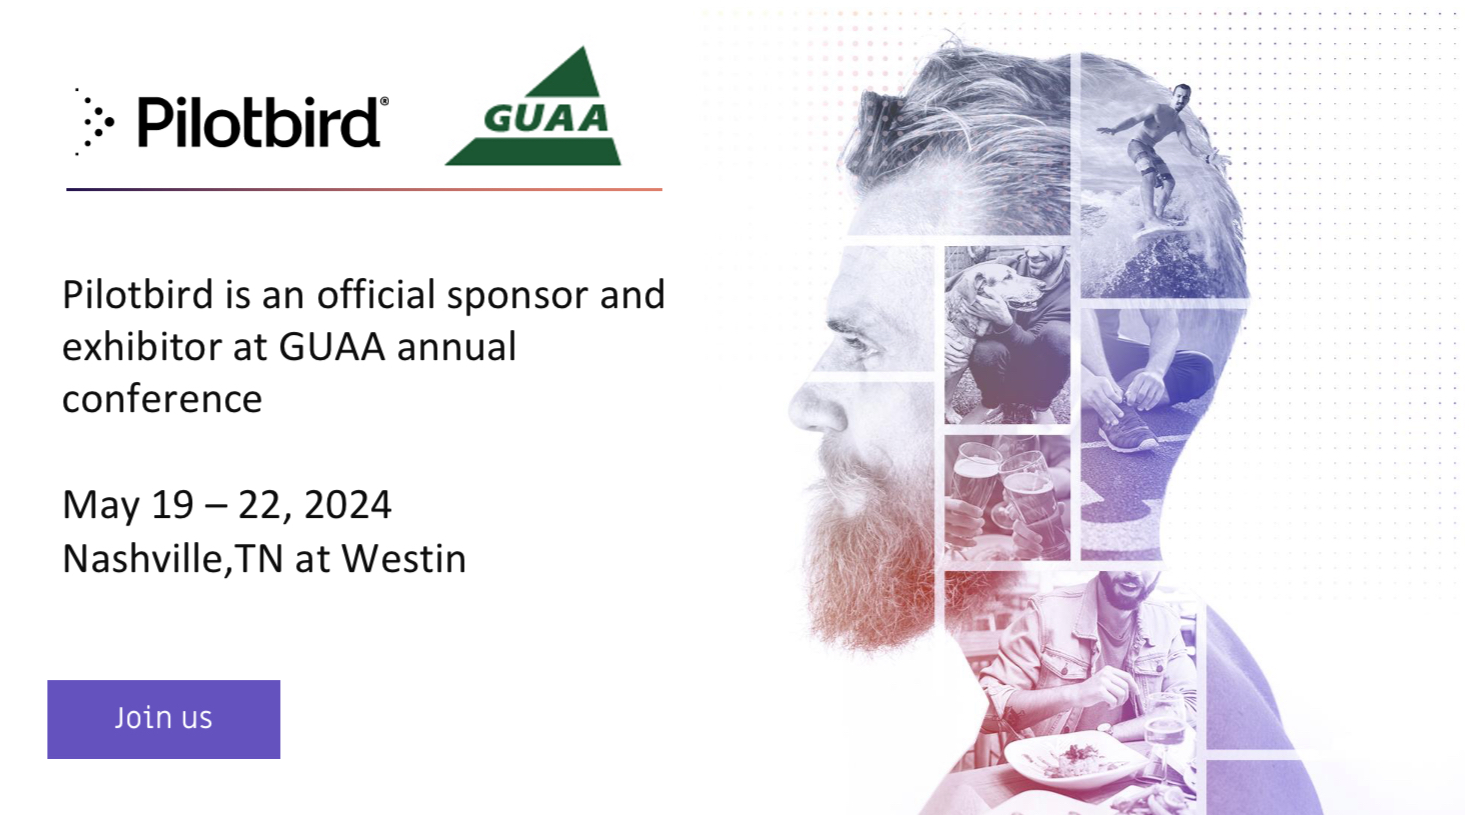 Pilotbird founder speaks at GUAA annual conference